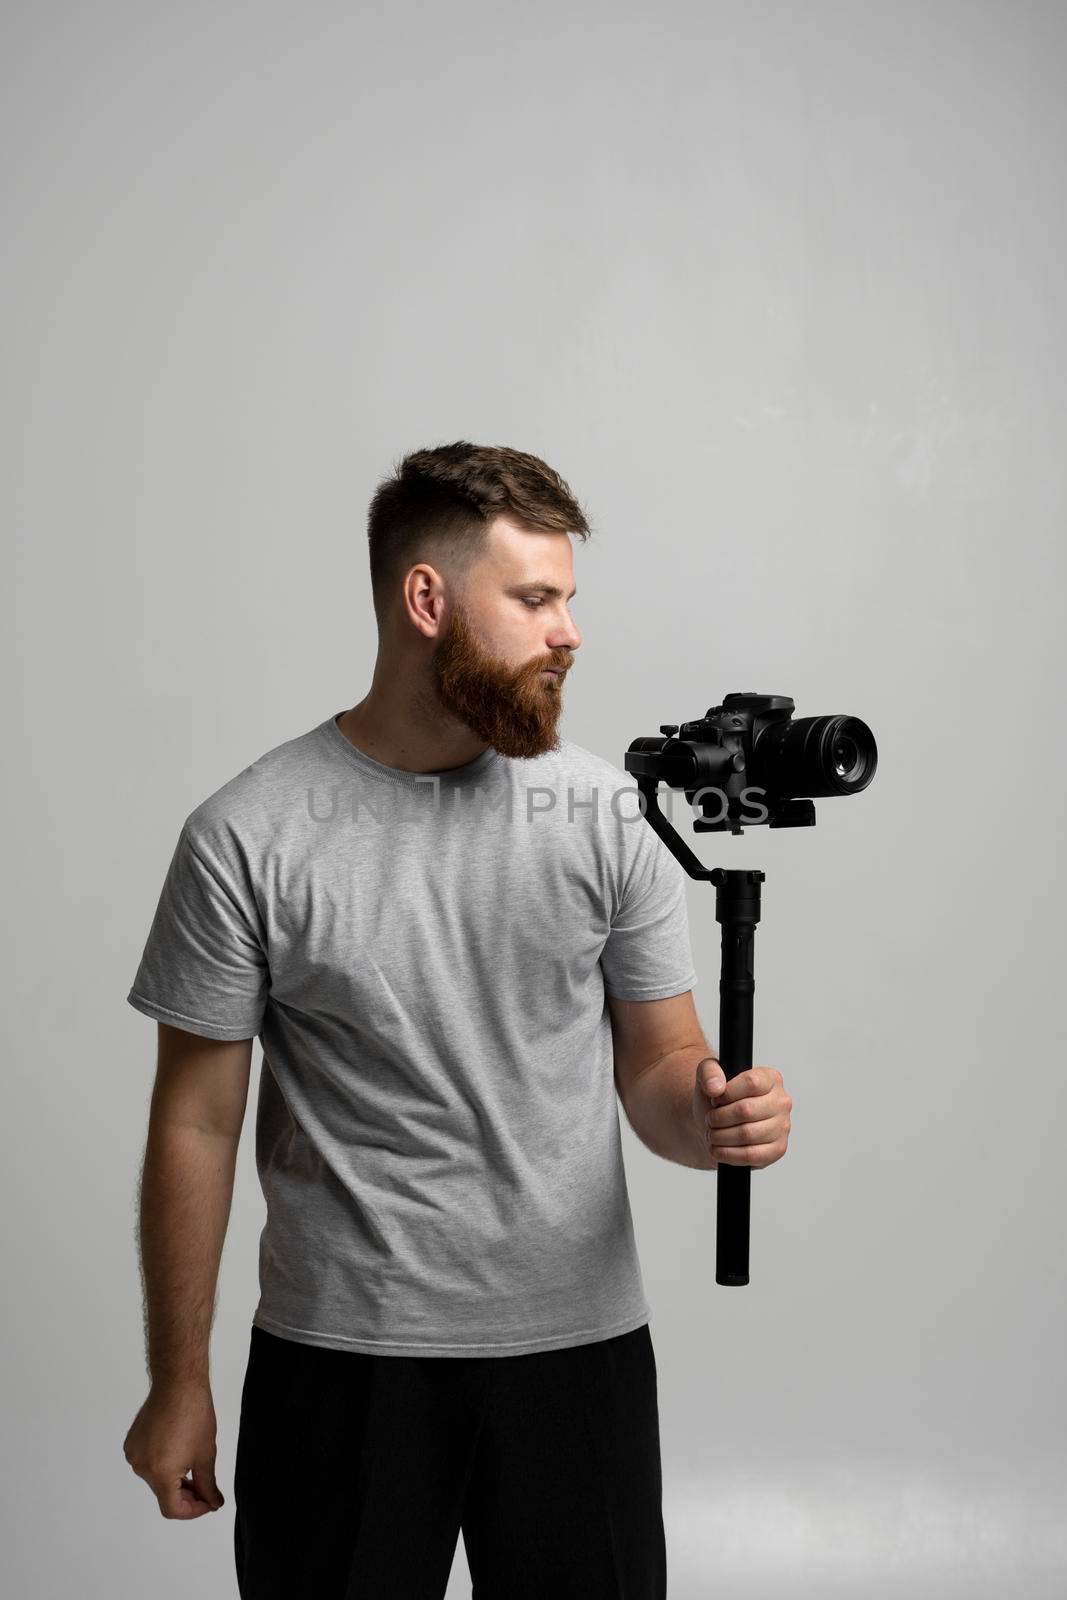 Professional cinematographer with a dslr camera on 3-axis gimbal stabilizer. Filmmaking, videography, hobby and creativity concept